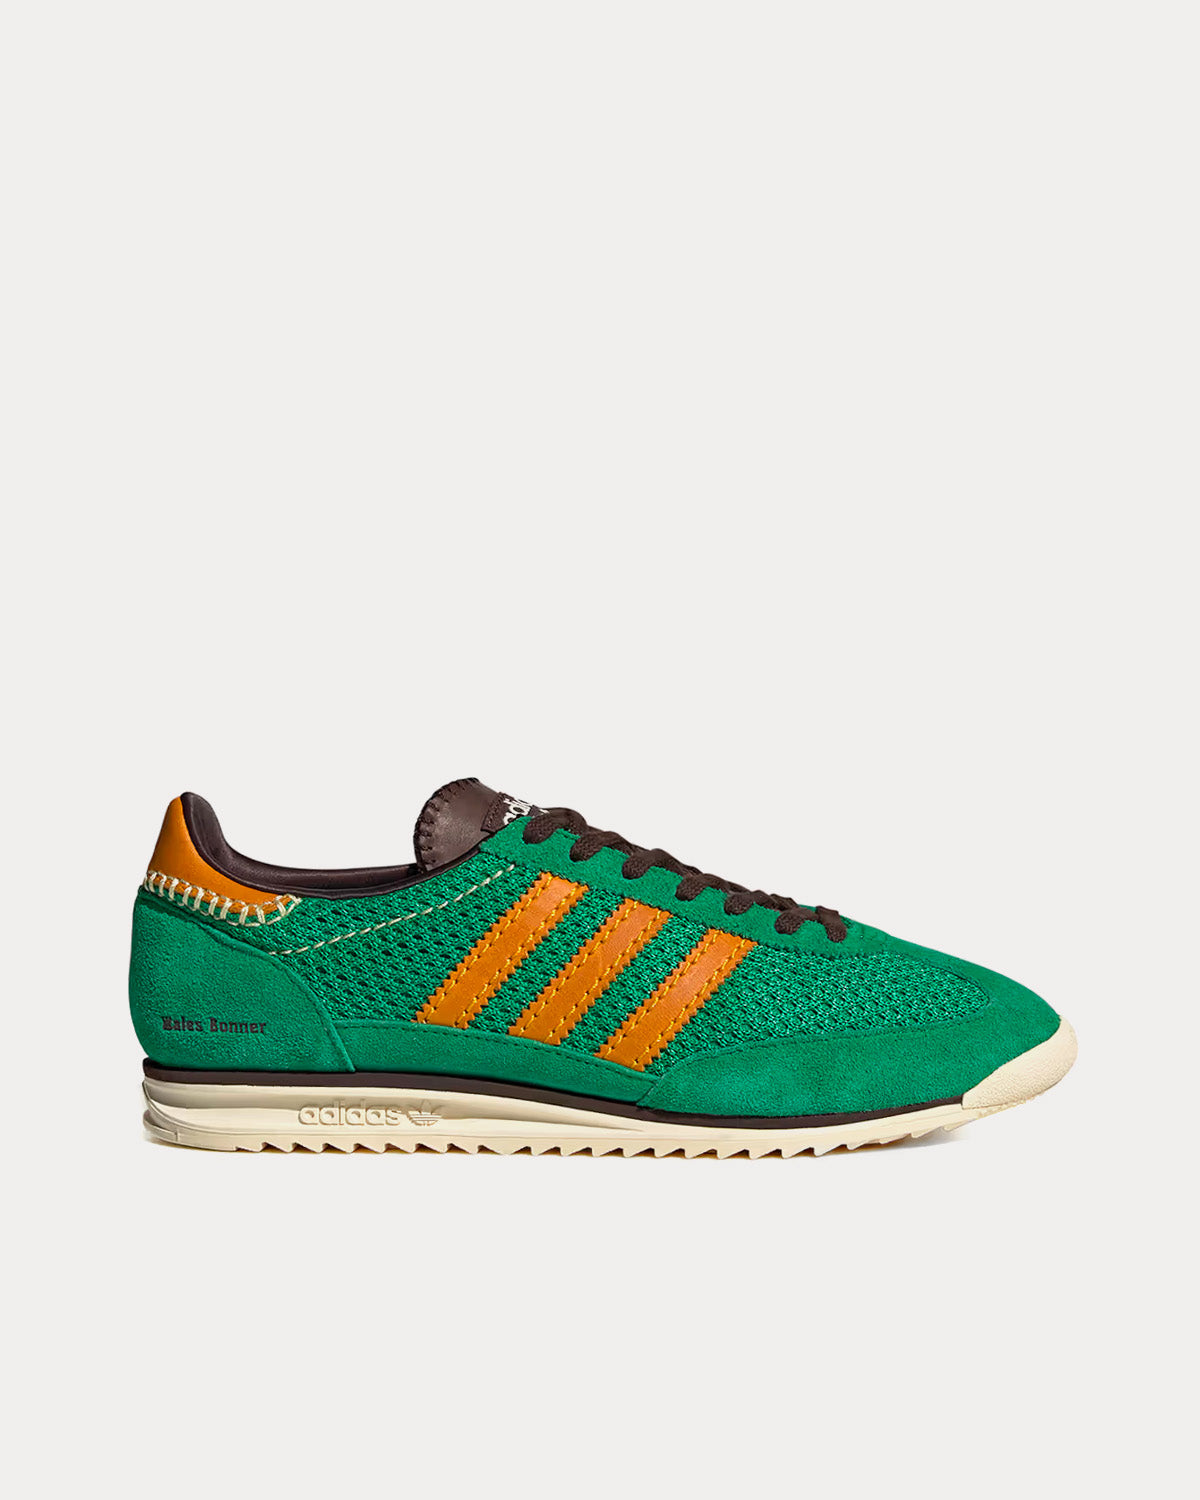 Adidas x Wales Bonner - SL72 Knit Green Low Top Sneakers